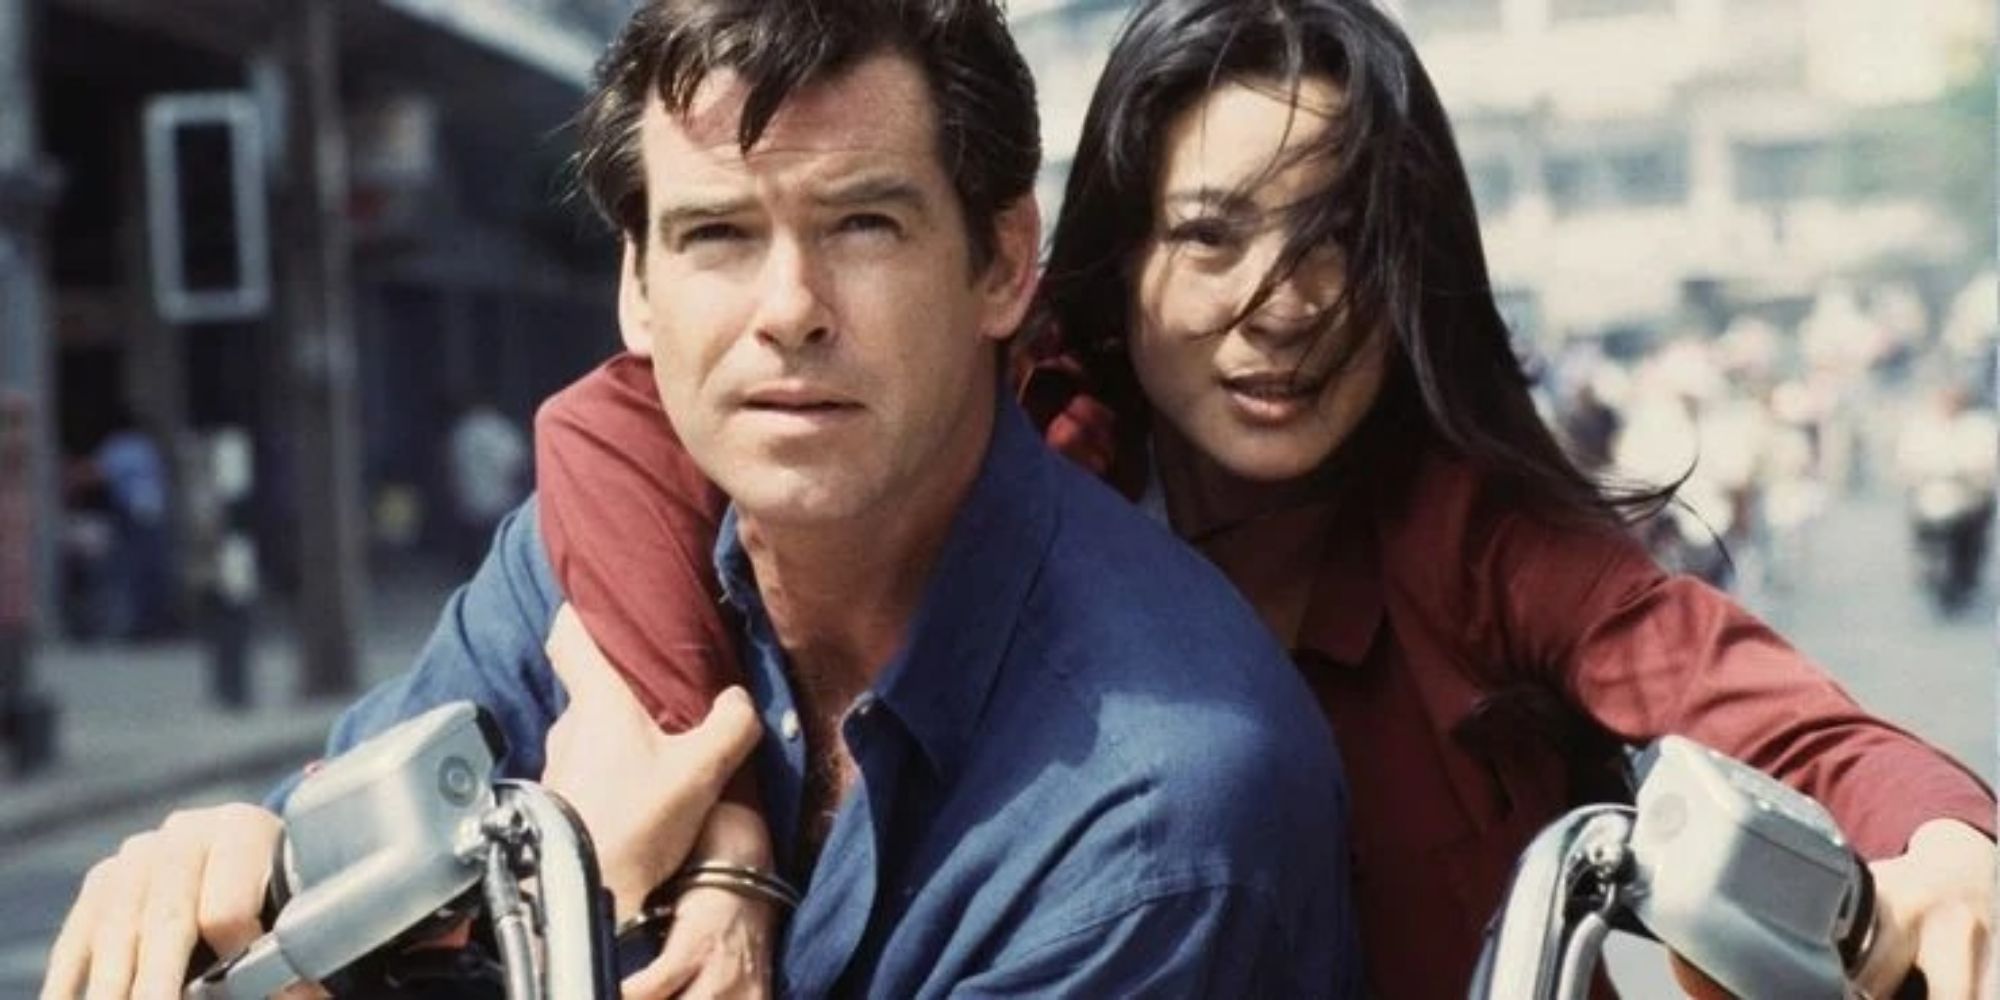 Michelle Yeoh and Pierce Brosnan in the James Bond film